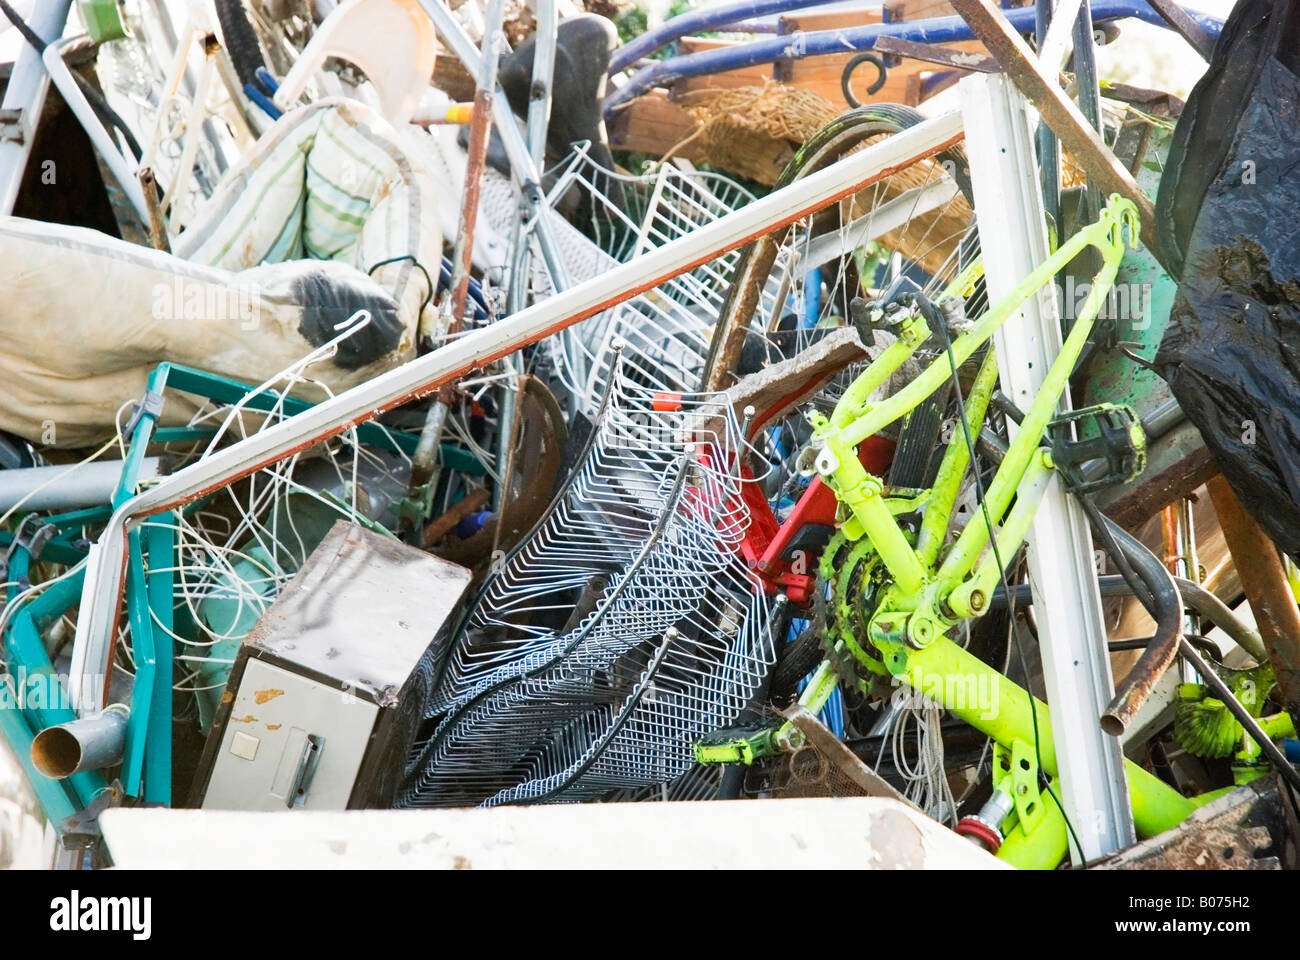 A pile of rubbish and waste at a landfill site. Stock Photo